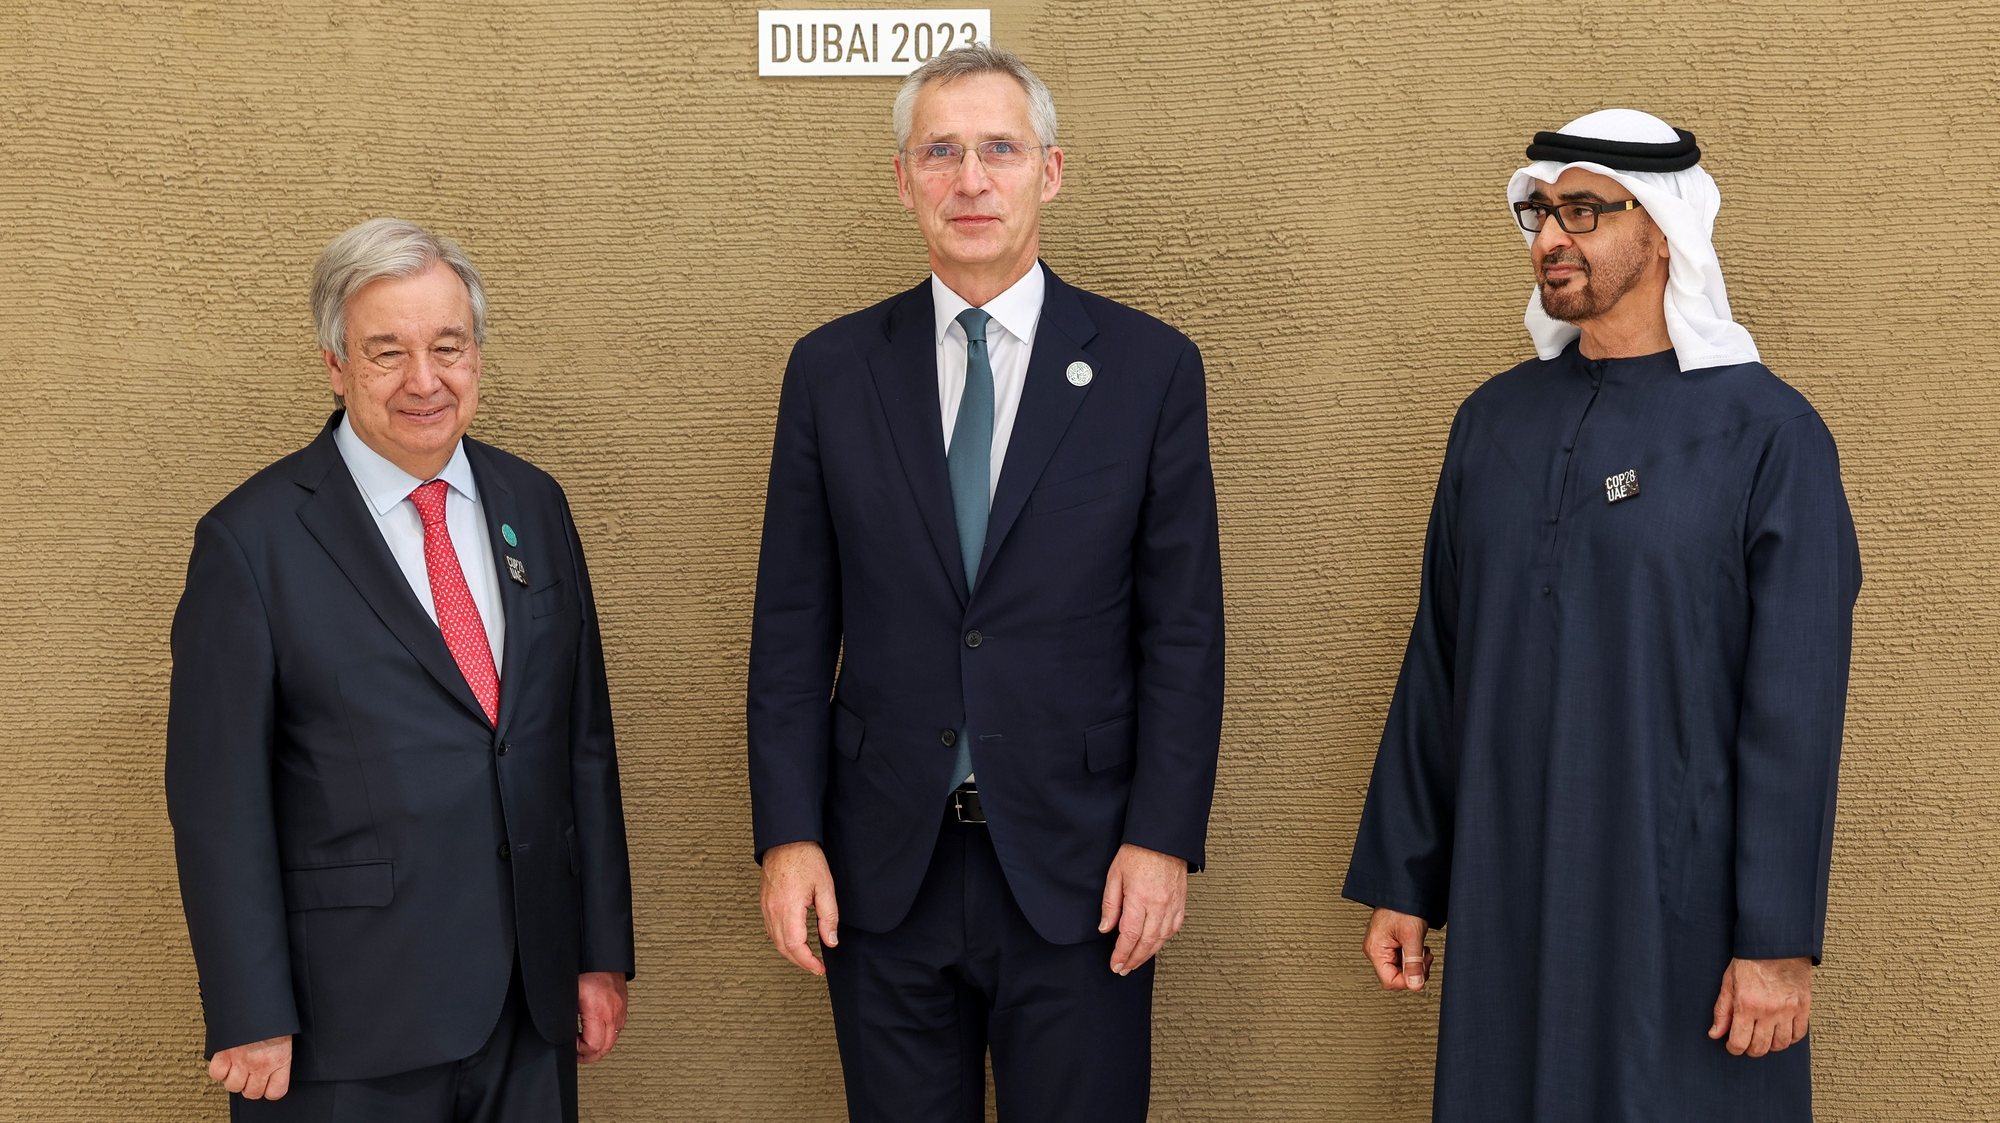 epa11005282 A handout photo made available by the UN Press Office shows (L-R) United Nations Secretary-General Antonio Guterres, Jens Stoltenberg, Secretary General of NATO, and Mohamed bin Zayed Al Nahyan, President of the United Arab Emirates and ruler of Abu Dhabi, posing for a photo during the UN Climate Change Conference COP28, in Dubai, United Arab Emirates, 01 December 2023. The 2023 United Nations Climate Change Conference (COP28), runs from 30 November to 12 December, and is expected to host one of the largest number of participants in the annual global climate conference as over 70,000 estimated attendees, including the member states of the UN Framework Convention on Climate Change (UNFCCC), business leaders, young people, climate scientists, Indigenous Peoples and other relevant stakeholders will attend.  EPA/MAHMOUD KHALED/ UN PRESS OFFICE / HANDOUT  HANDOUT EDITORIAL USE ONLY/NO SALES HANDOUT EDITORIAL USE ONLY/NO SALES